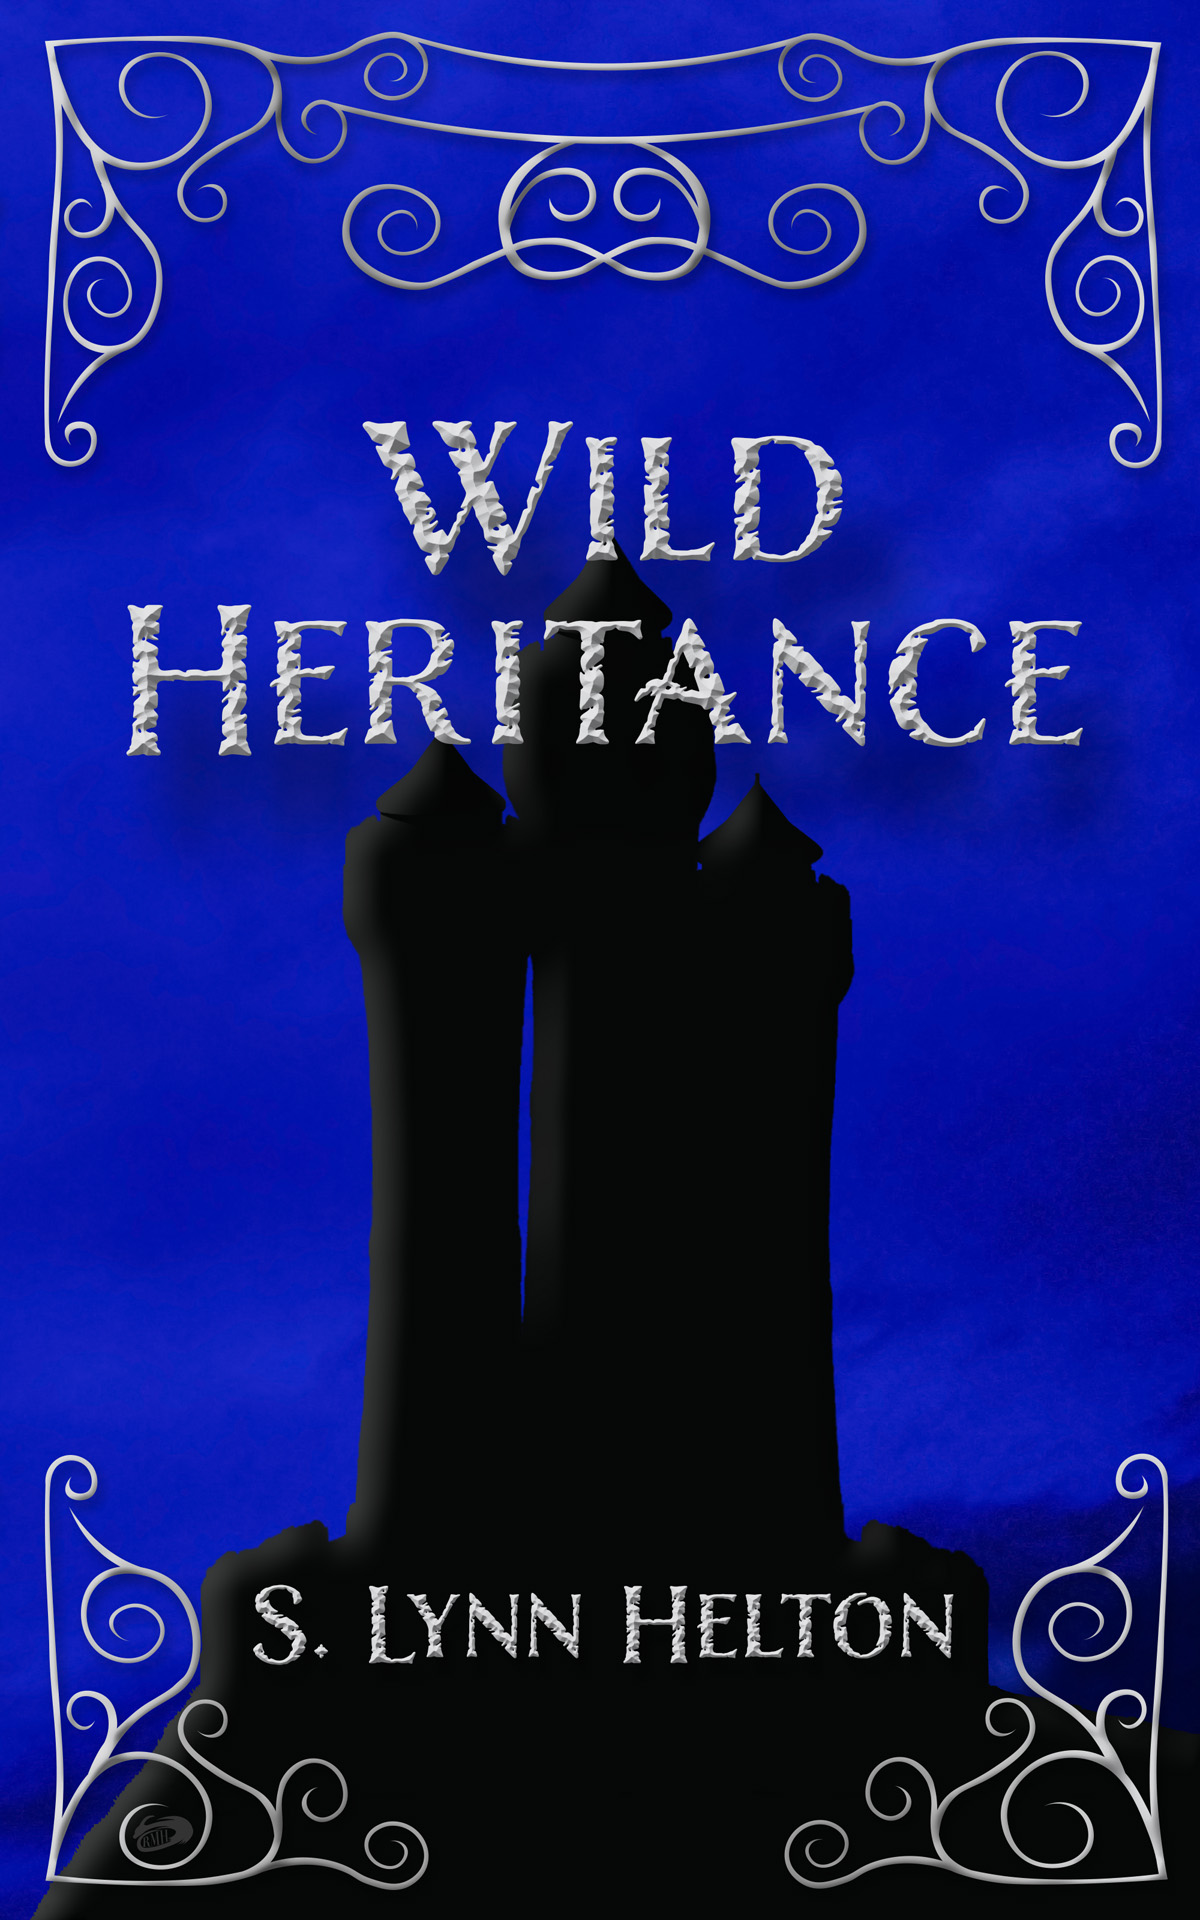 "Cover" for the Wild Heritance series by S. Lynn Helton